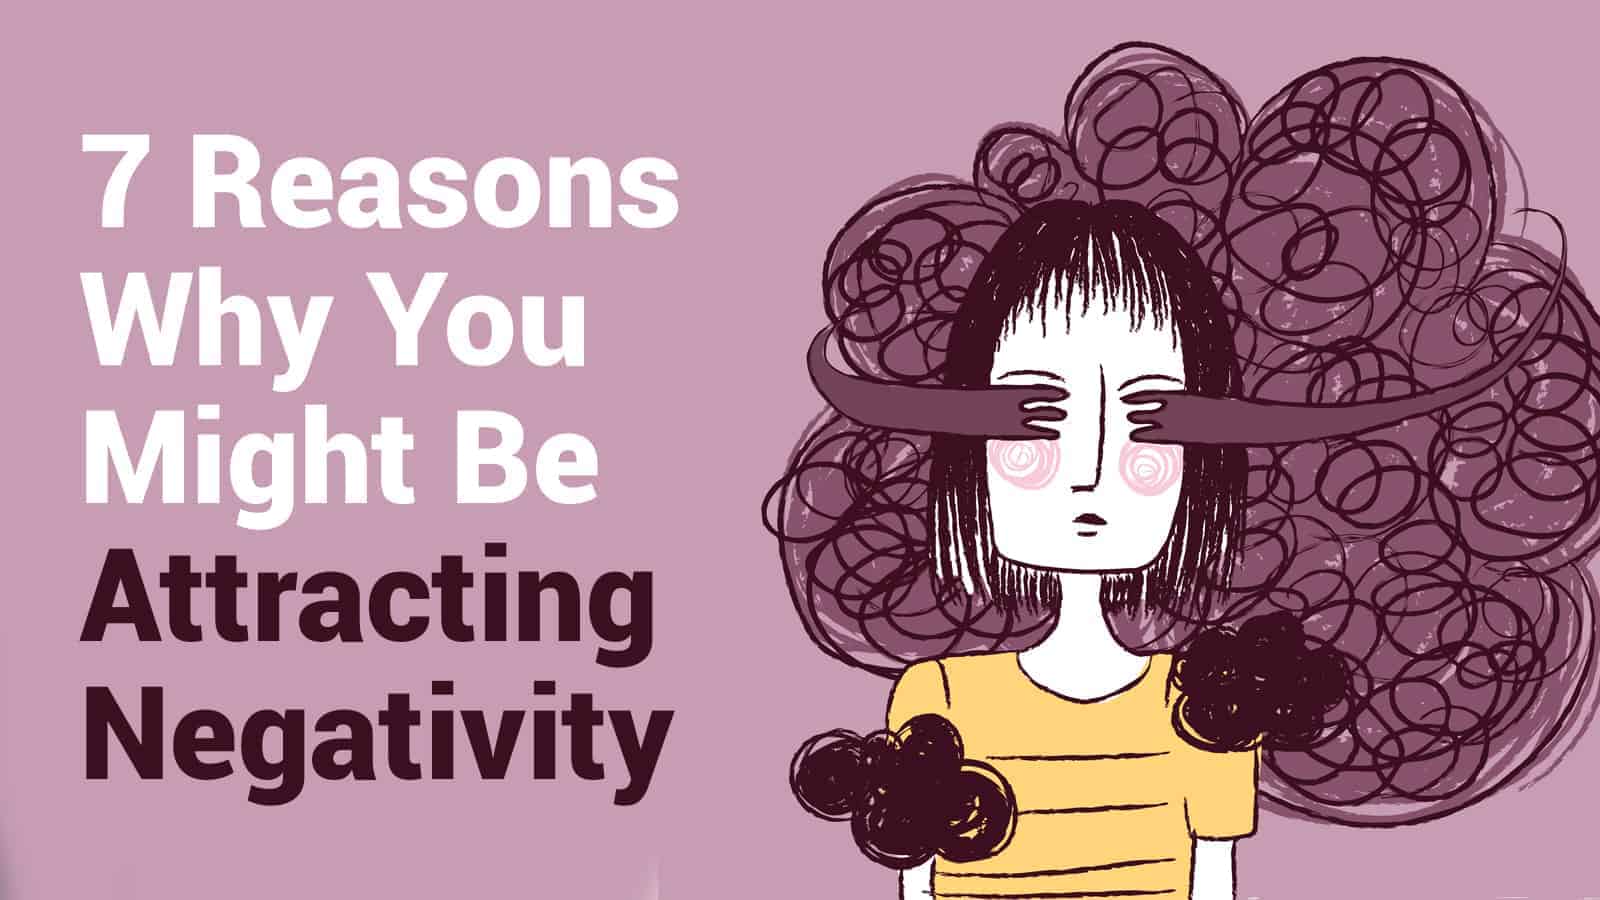 7 Reasons Why You Might Be Attracting Negativity